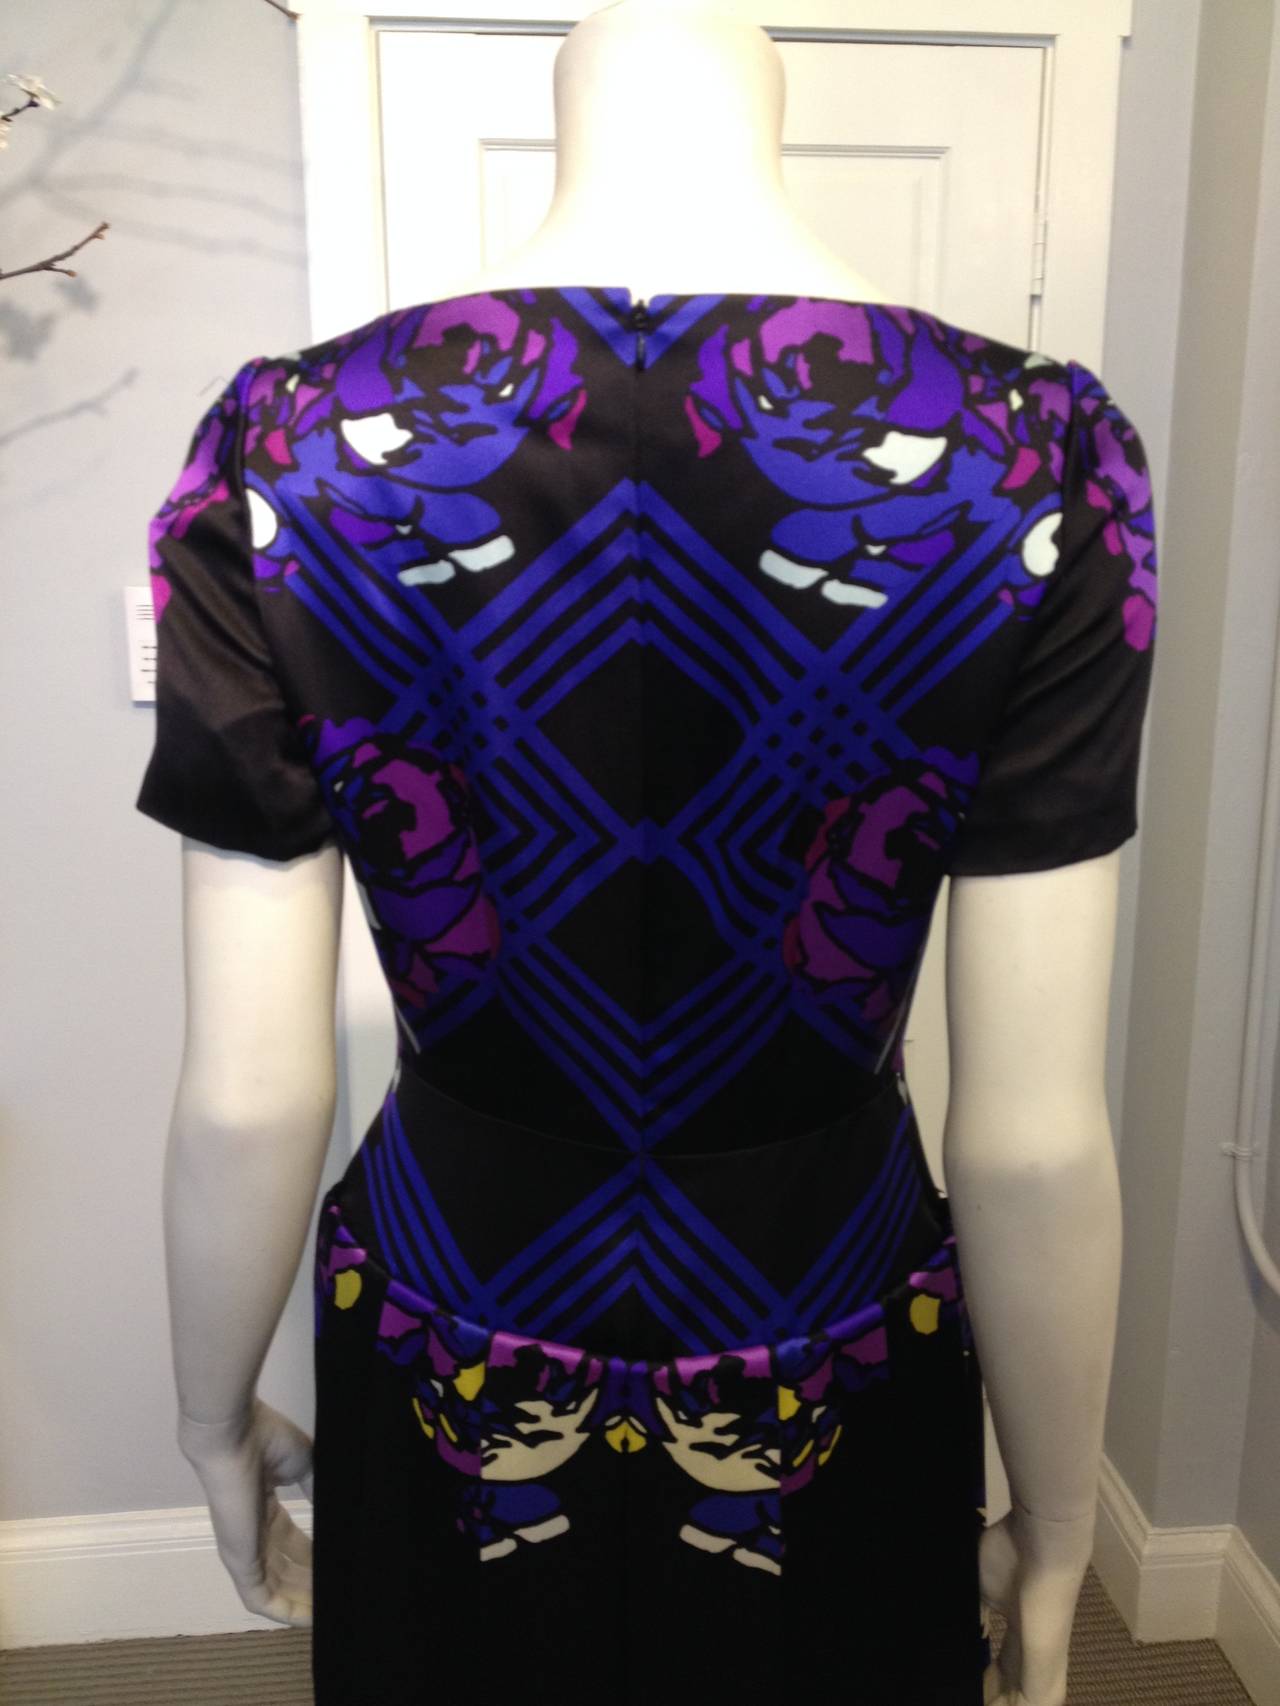 This gorgeous Honor dress is resplendent in deep violet purple and vibrant blue - looming out of the black background, the stylized stenciled flowers and geometric stripes are lively, bold, and impactful. The heavy satin material has a beautifully